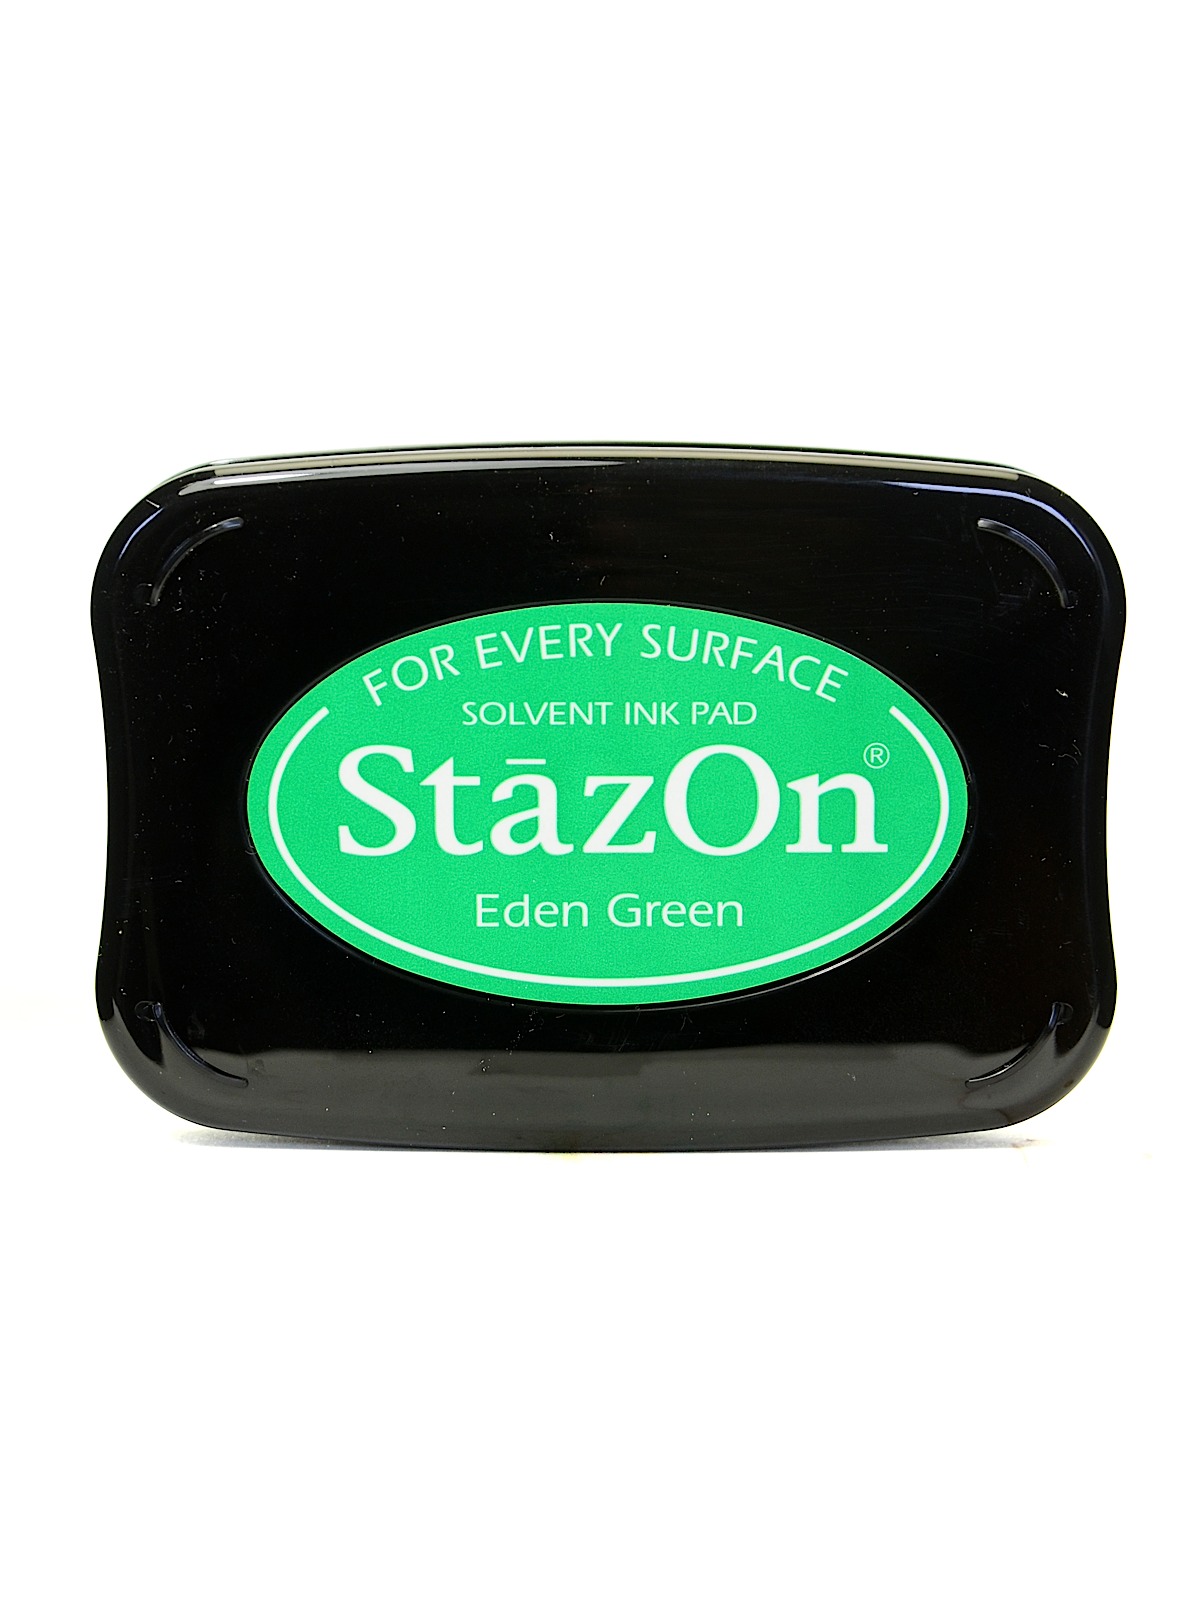 Stazon Solvent Ink Eden Green 3.75 In. X 2.625 In. Full-size Pad